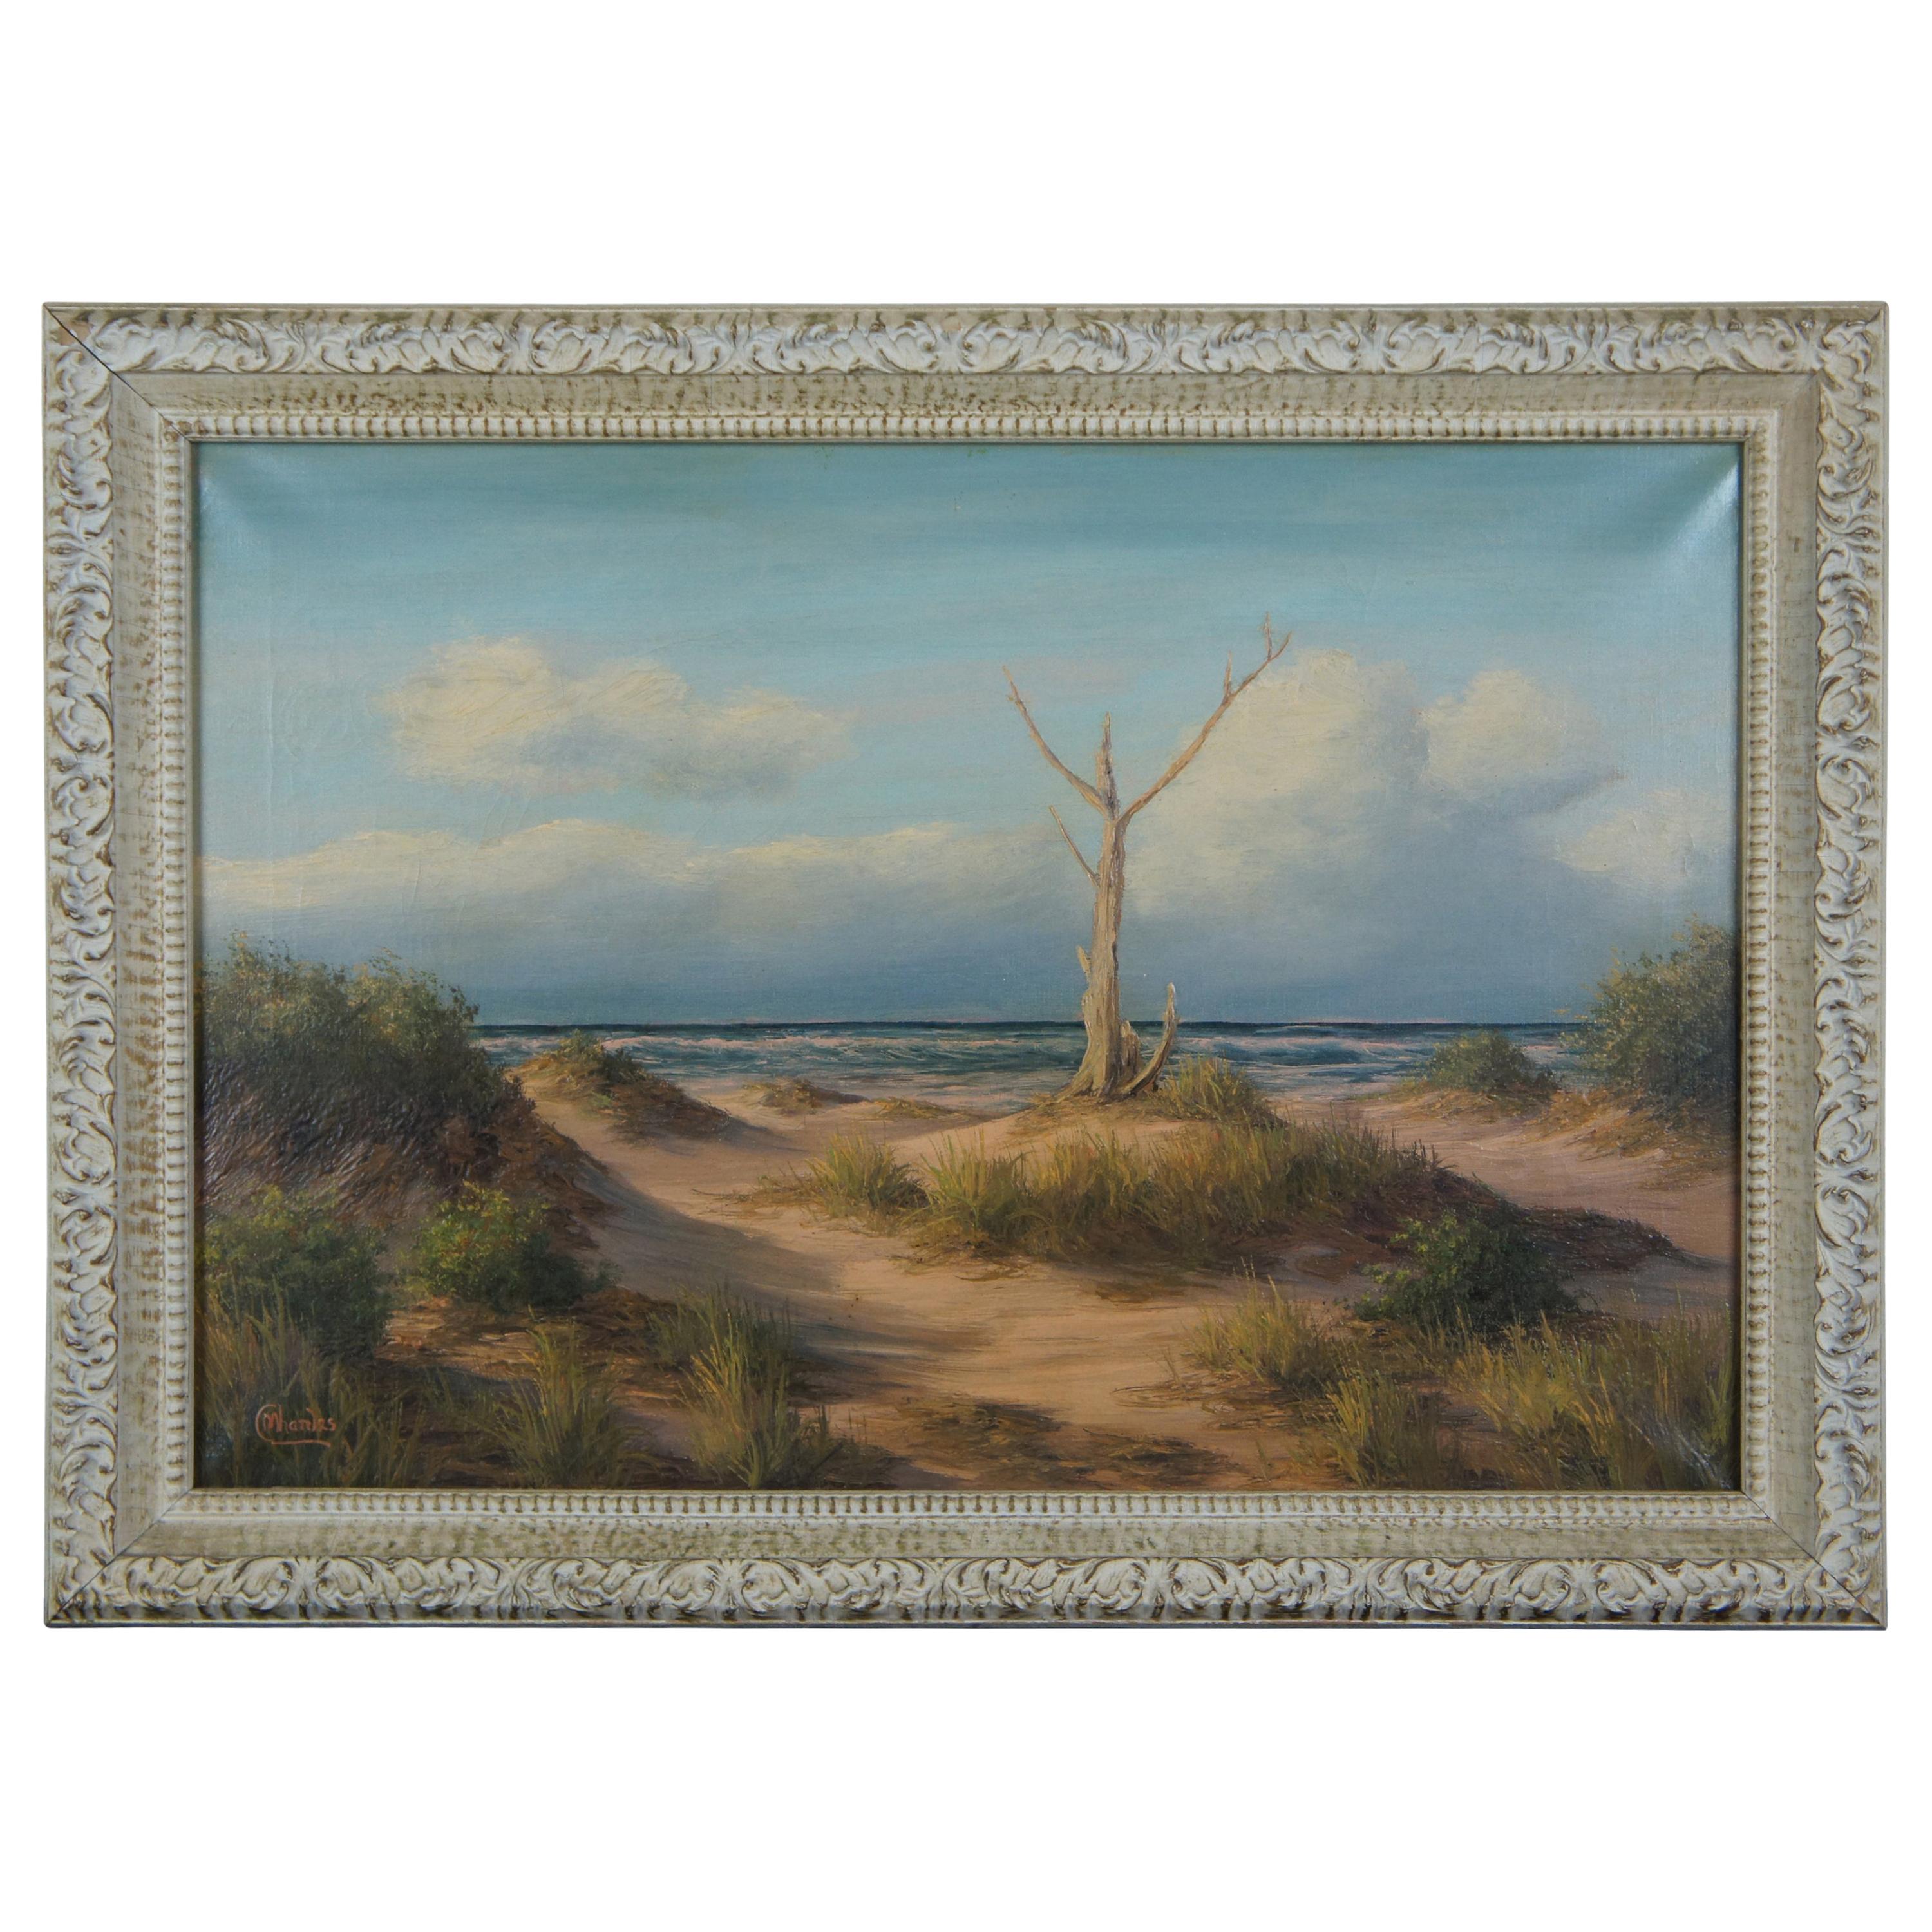 M. Charles Donald Leary Beach Dunes Ocean Landscape Oil Painting on Canvas